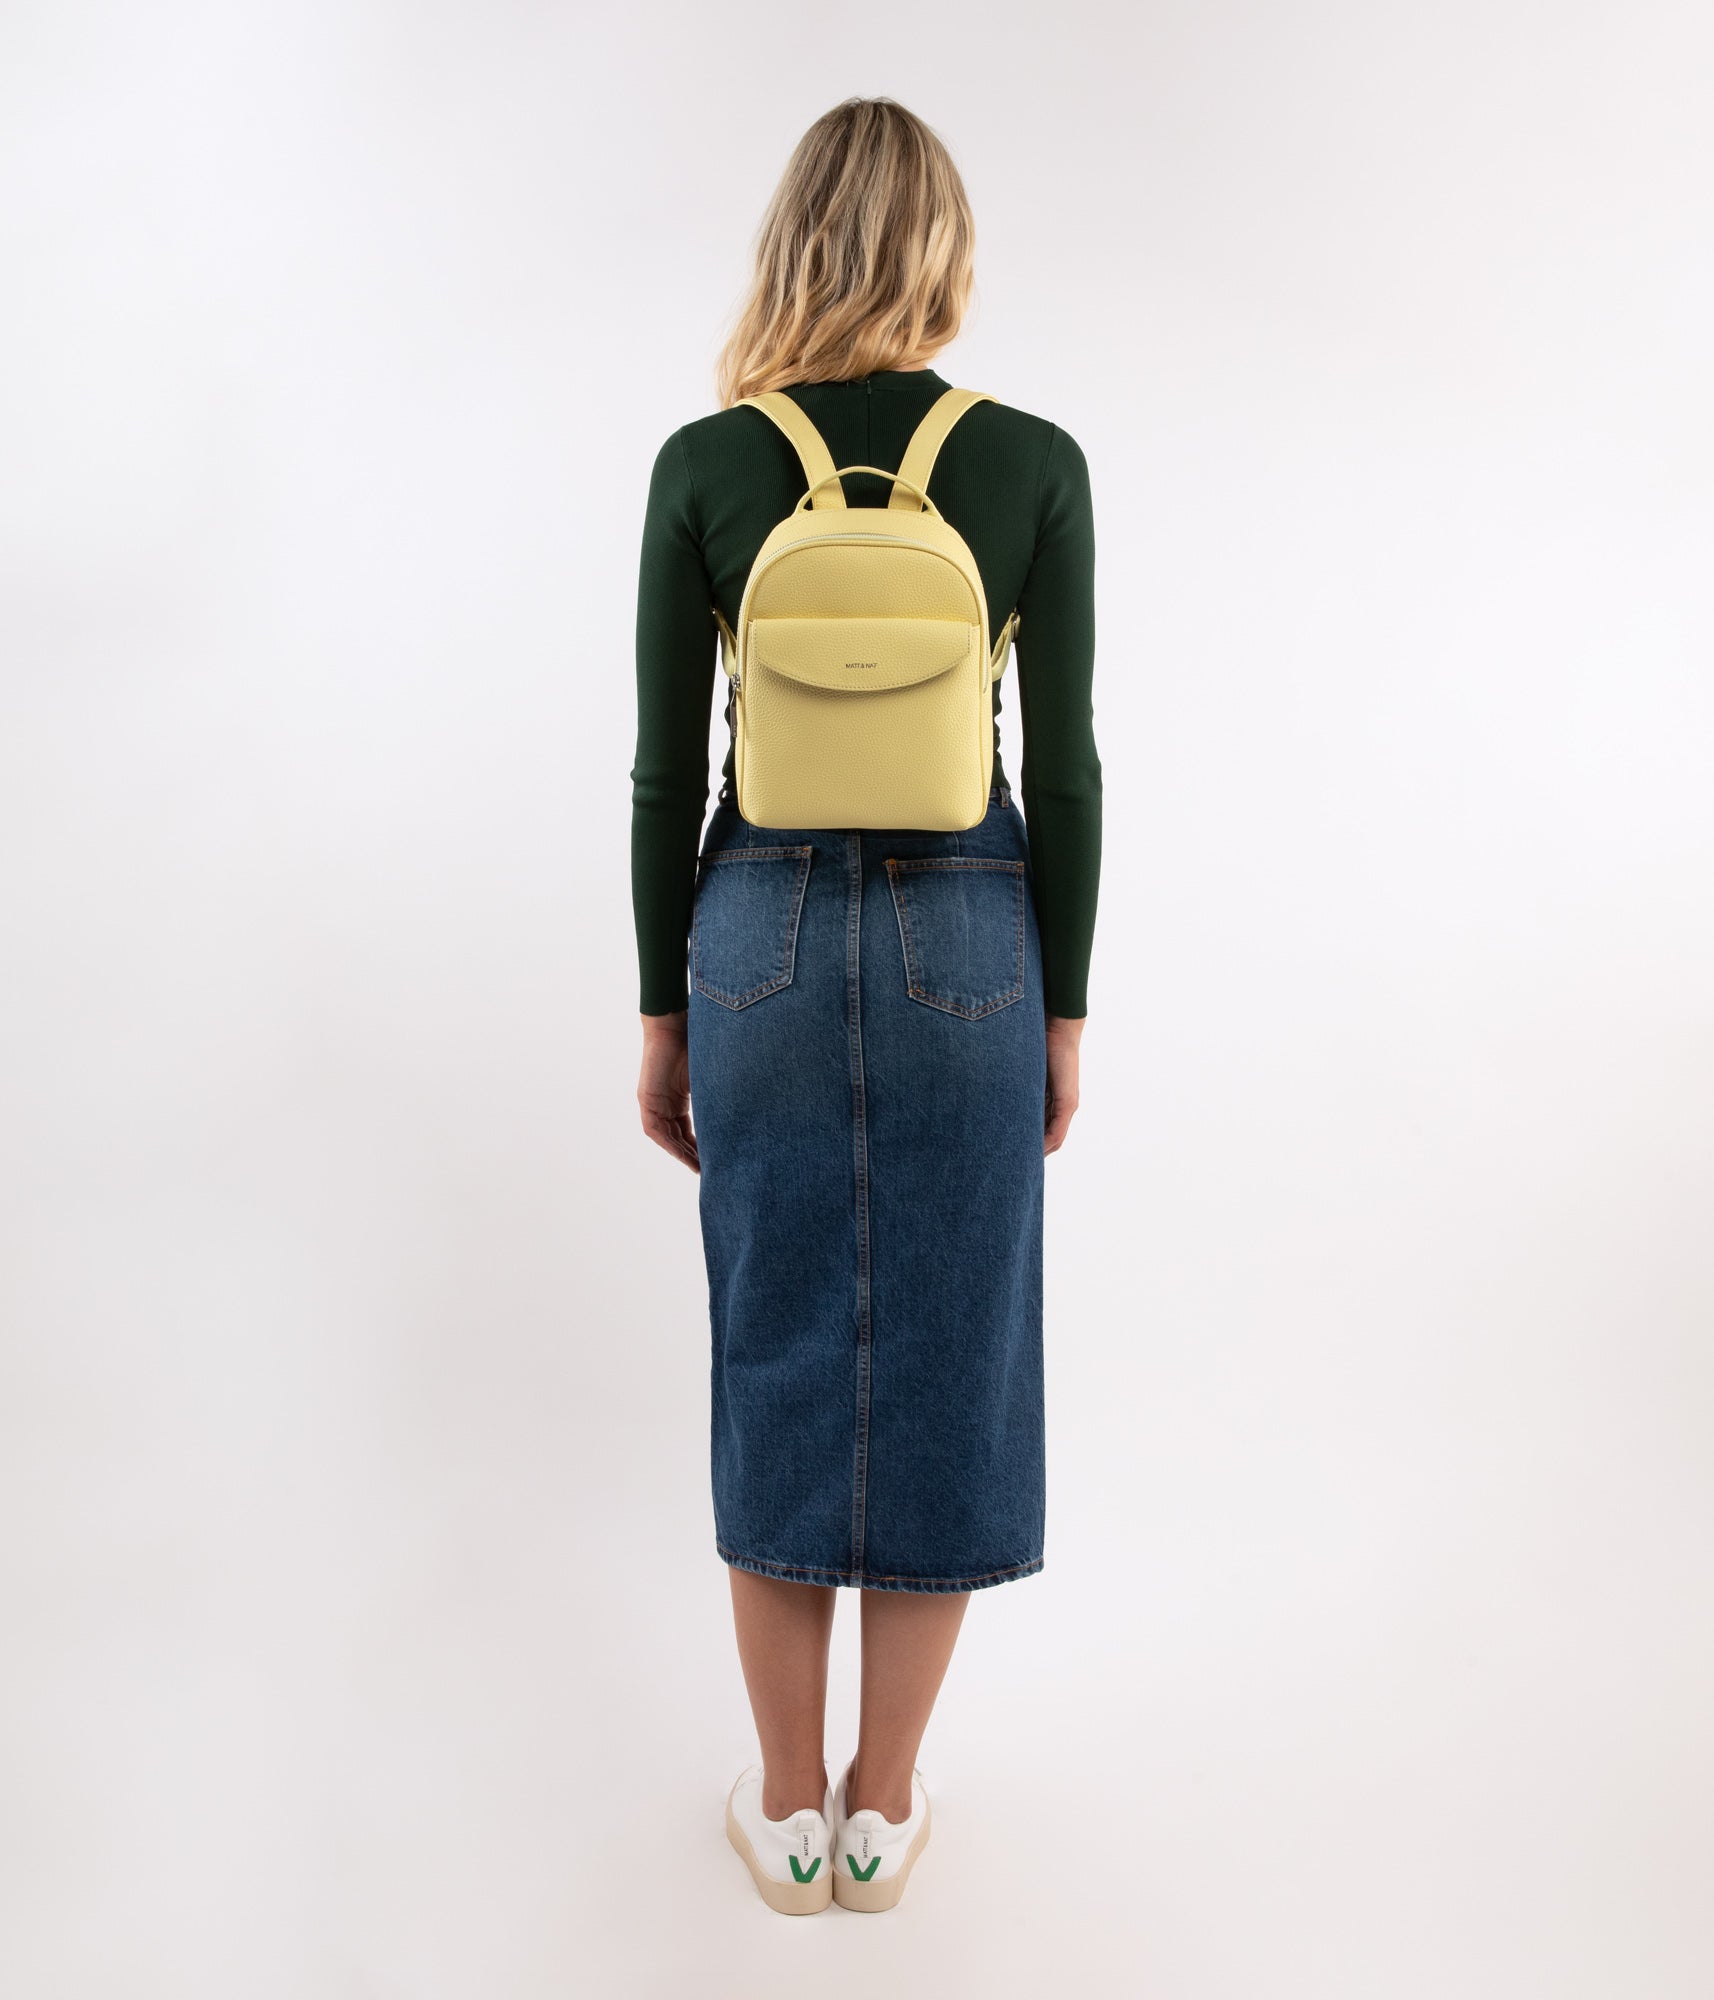 HARLEM Small Vegan Backpack - Purity | Color: Yellow - variant::daffodil